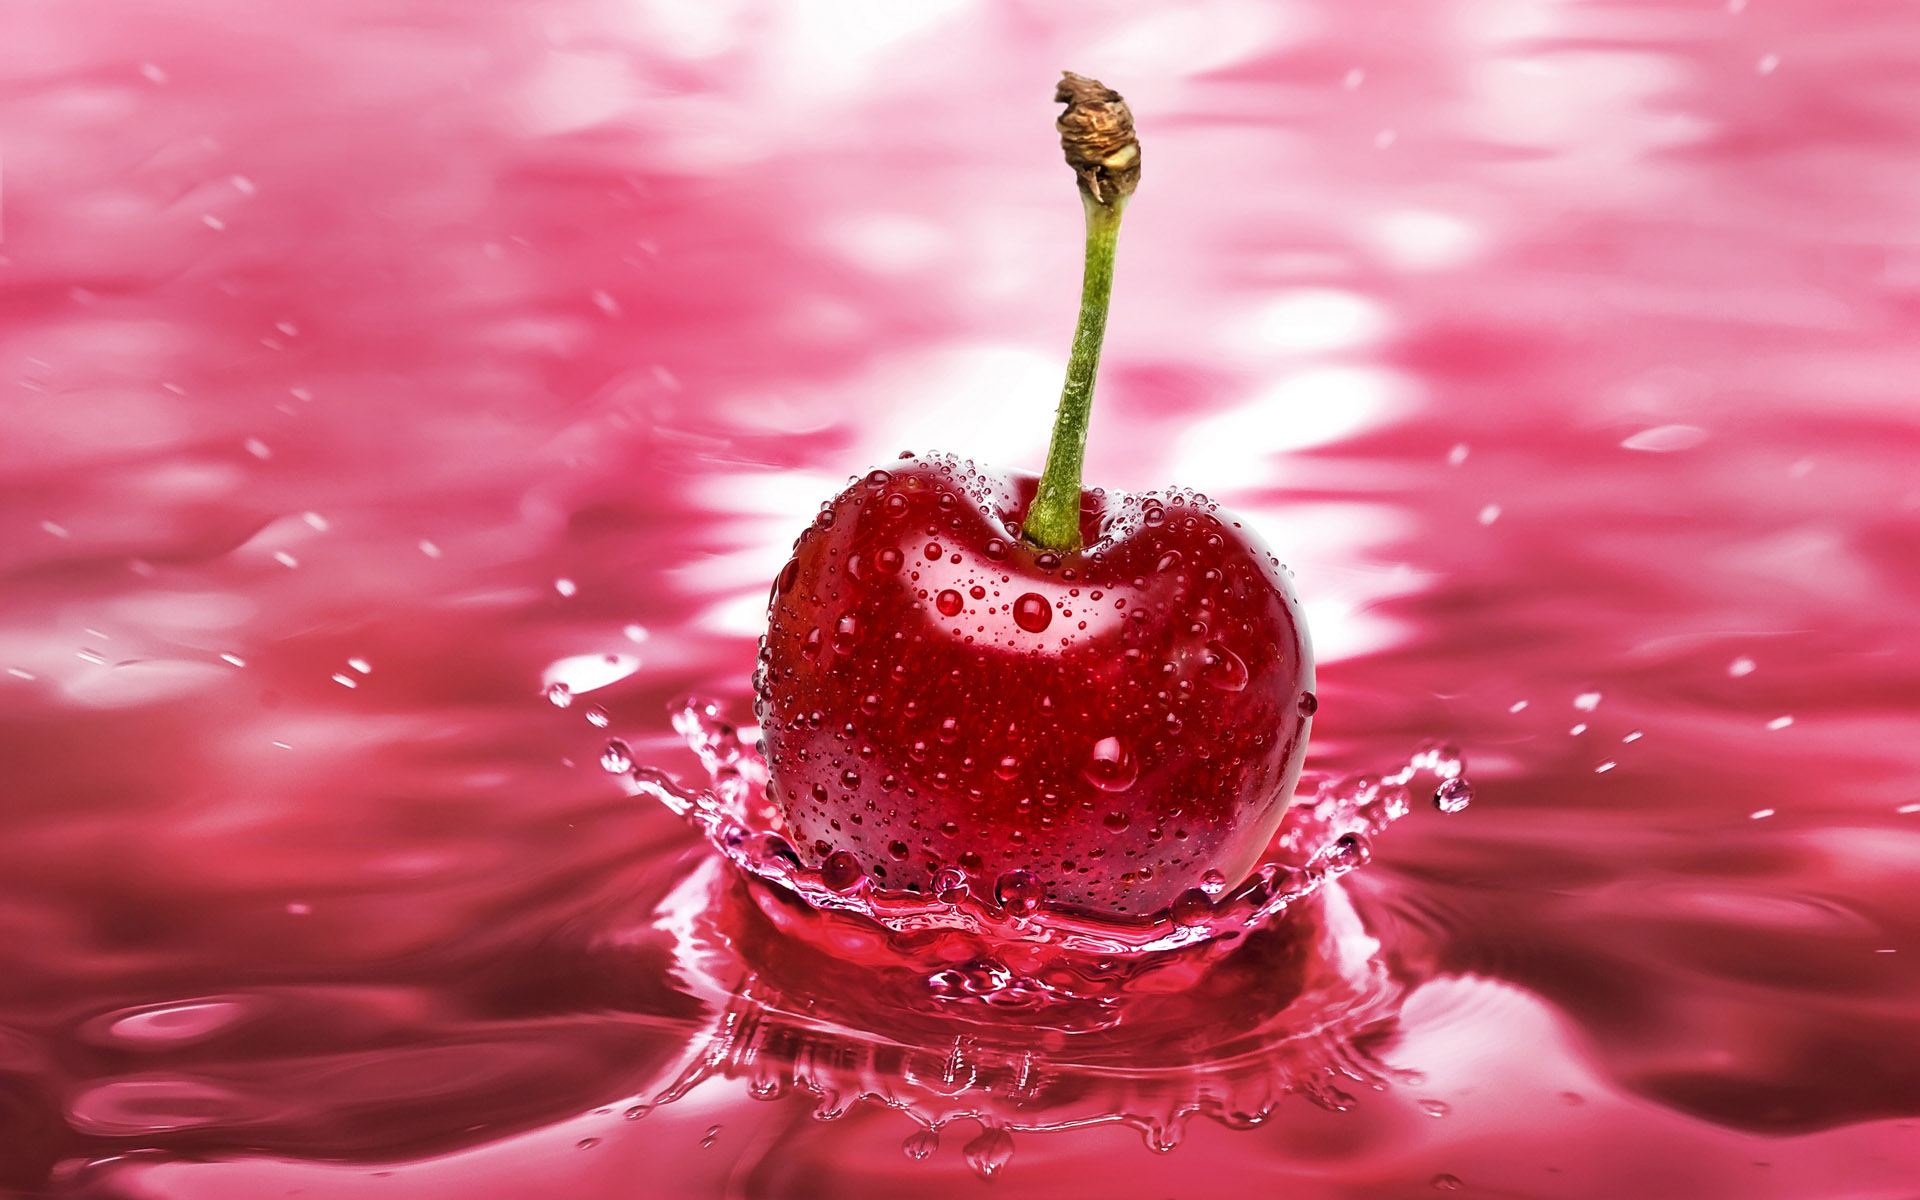 Assorted fruits submerged in water - refreshing and colorful hd desktop wallpaper.